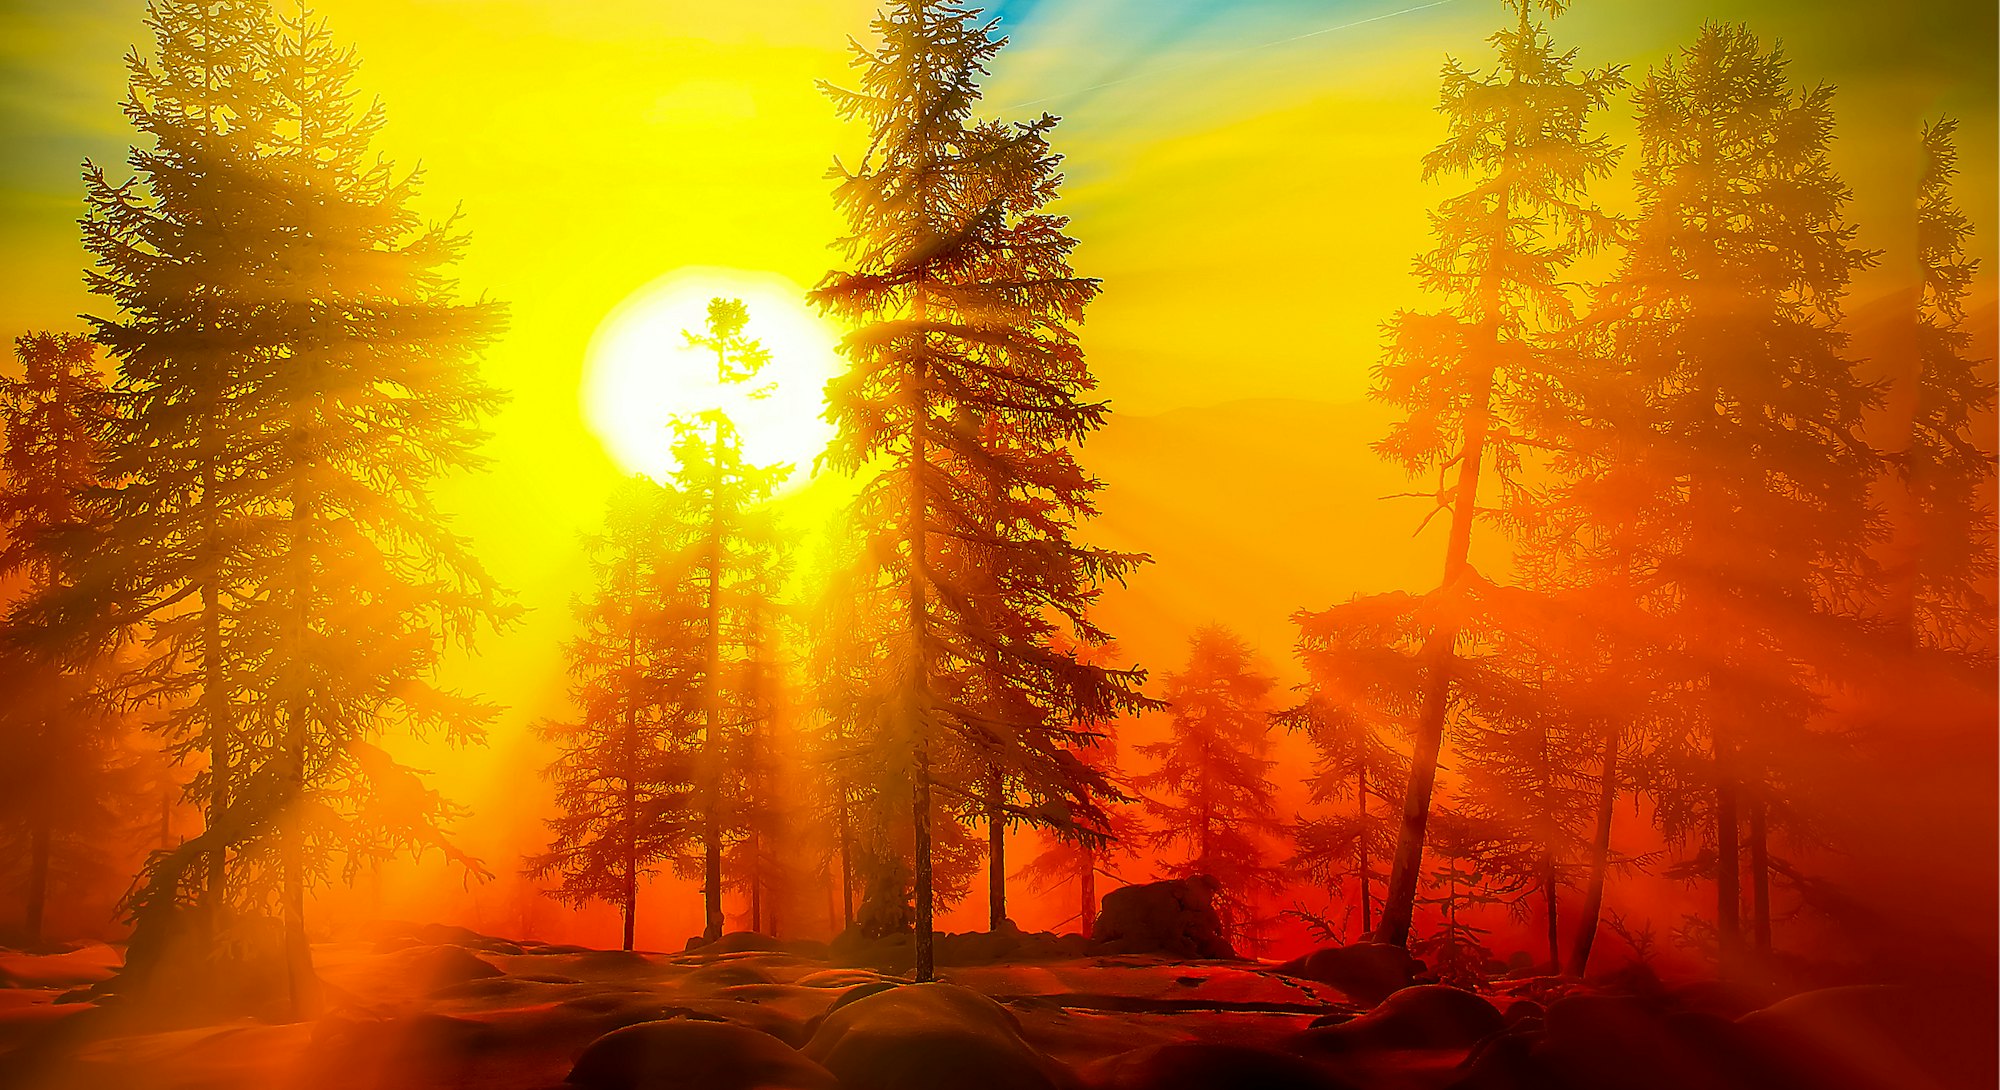 Sunrise in forest. Forest sunrise view. Sunrise forest trees landscape. Sunrise in winter forest